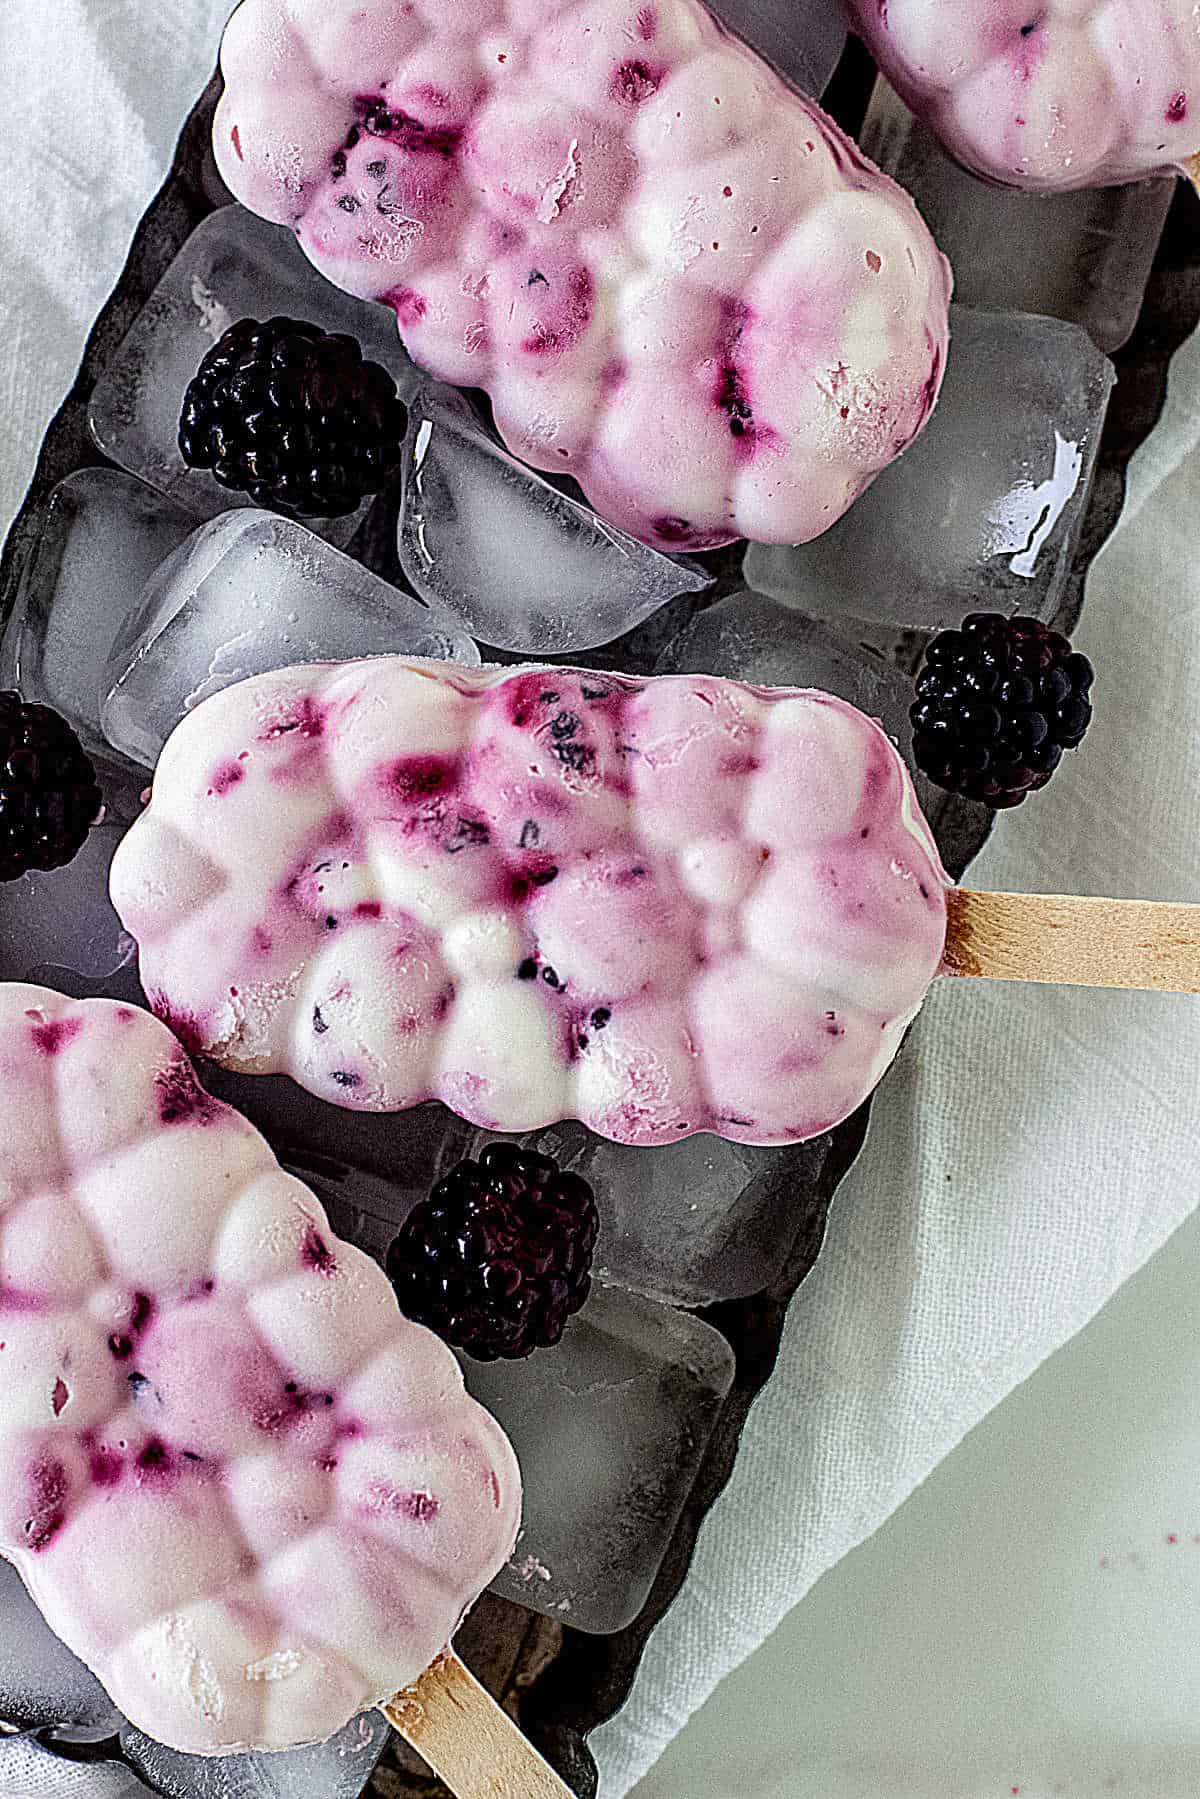 Overview of several bubble shaped berry ice cream popsicles on ice cubes in metal pan